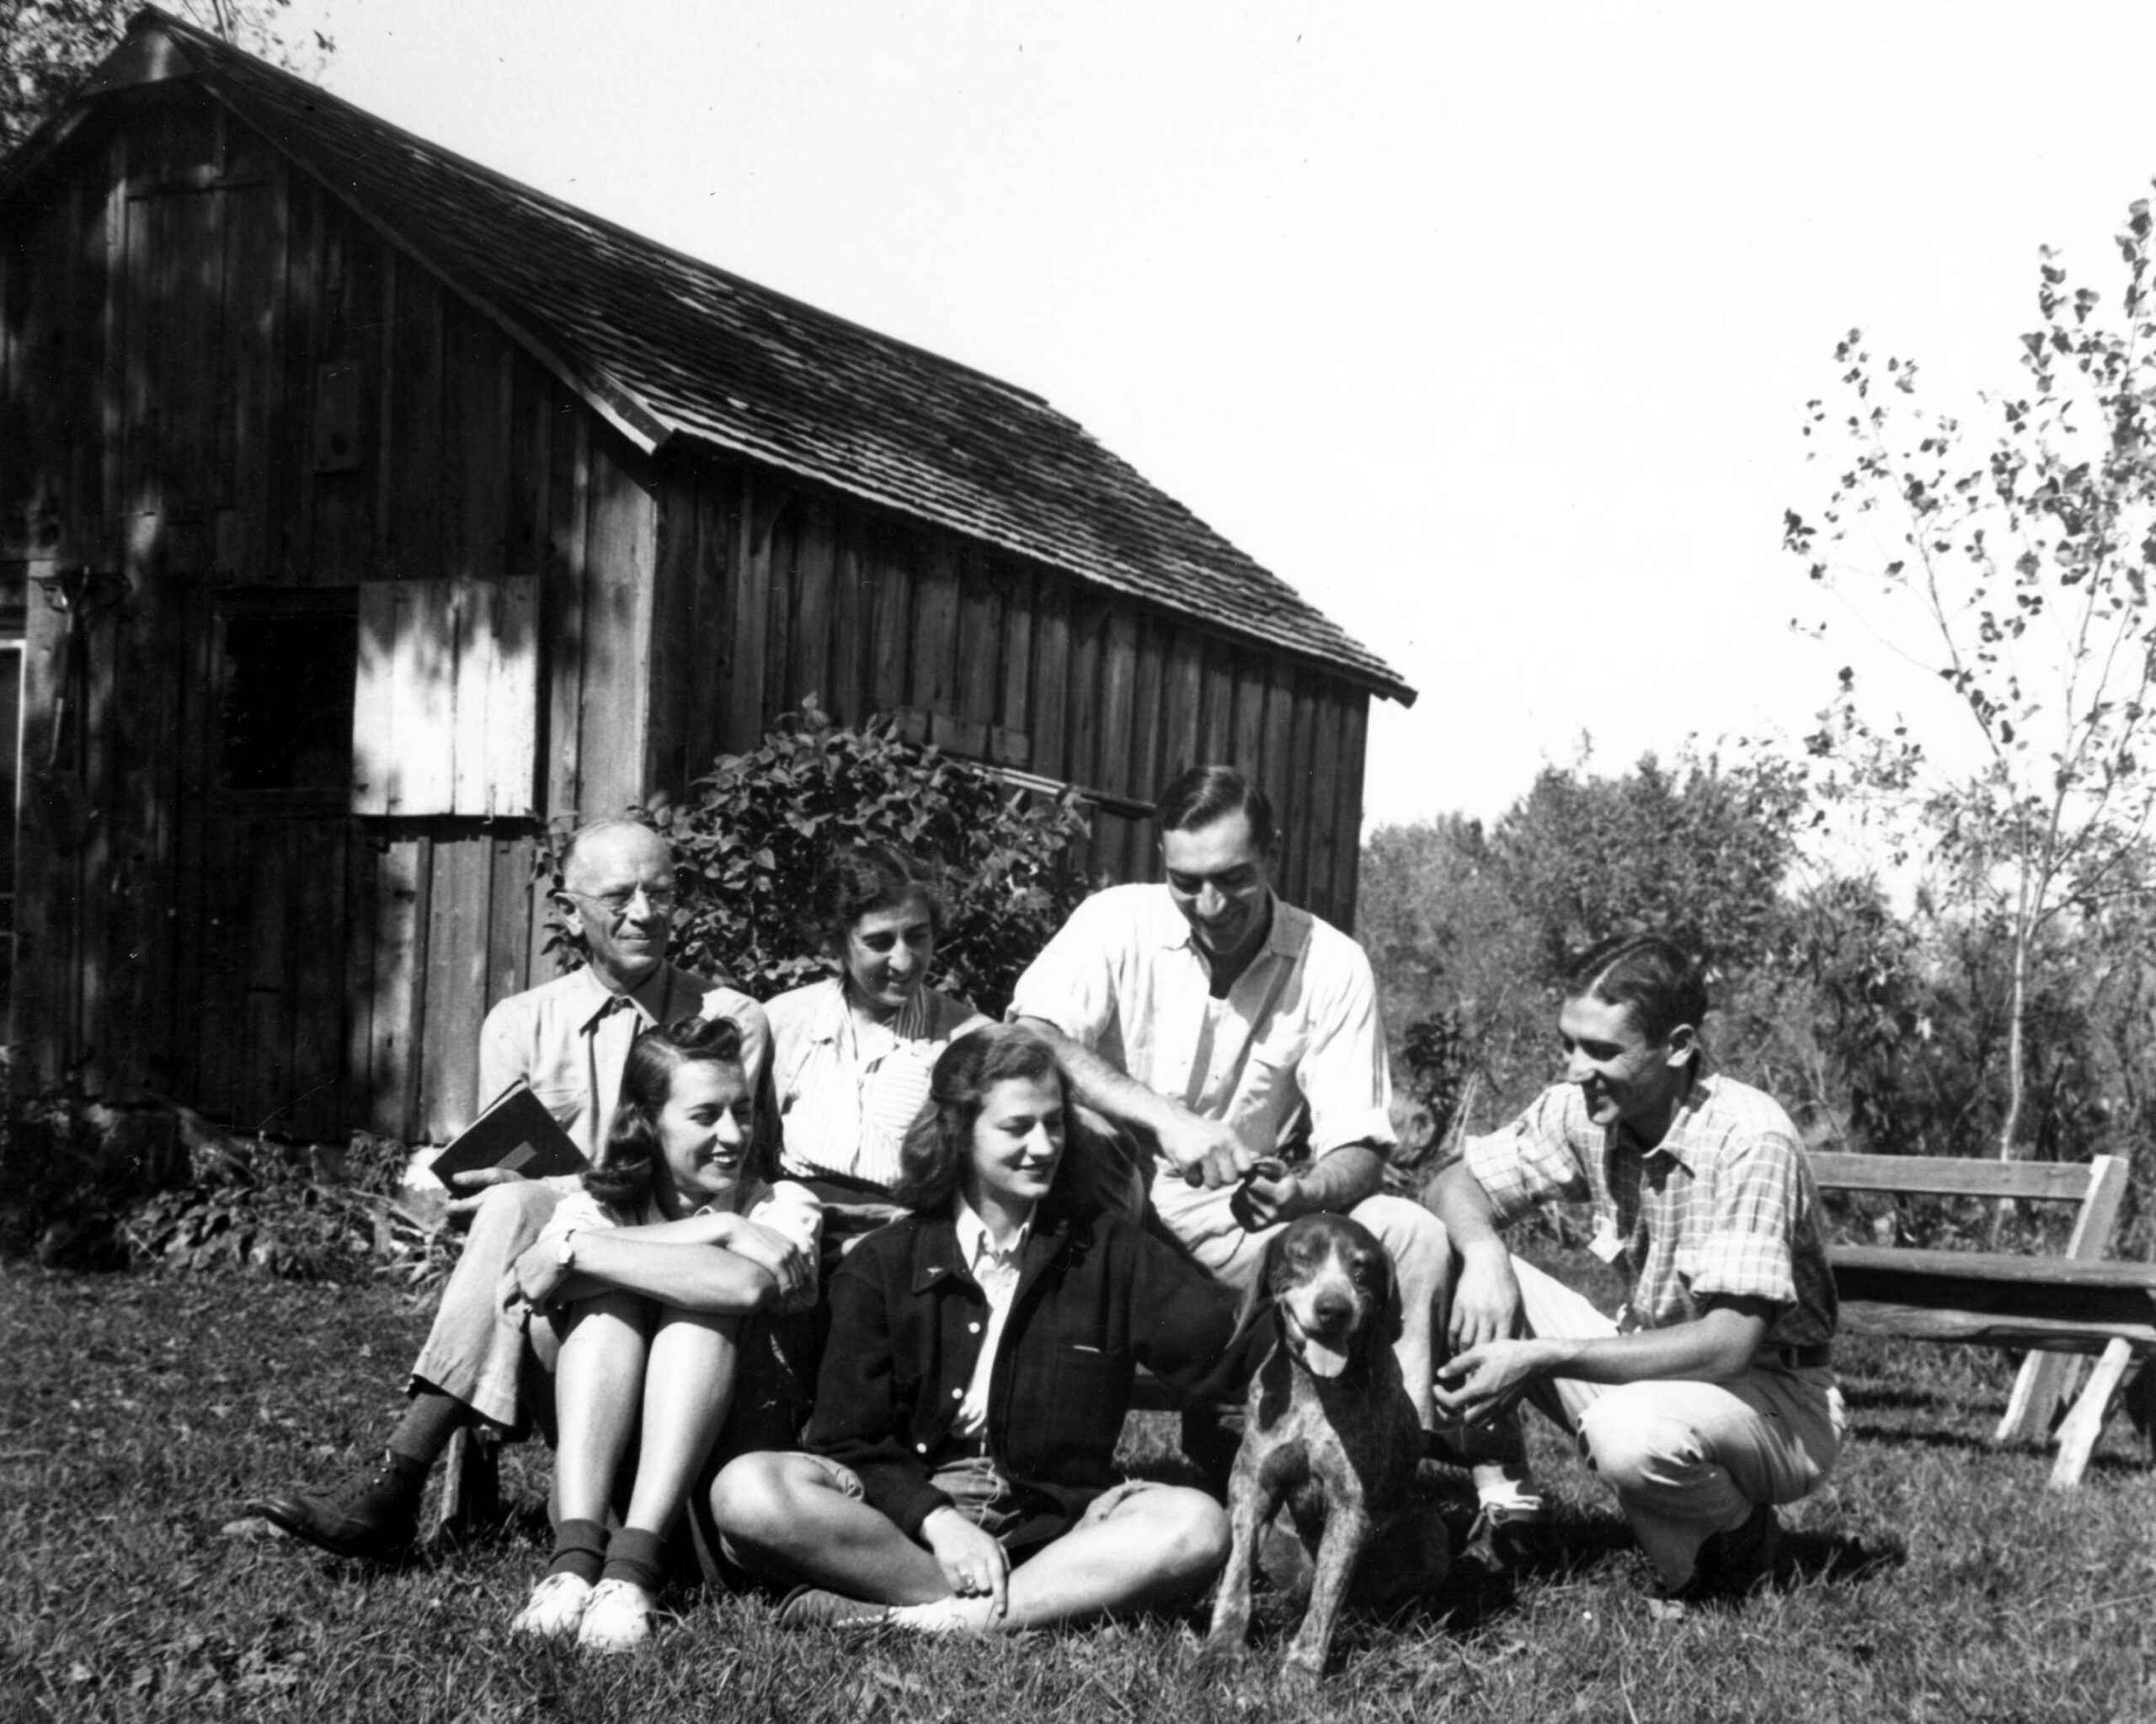 Aldo Leopold with family at the shack